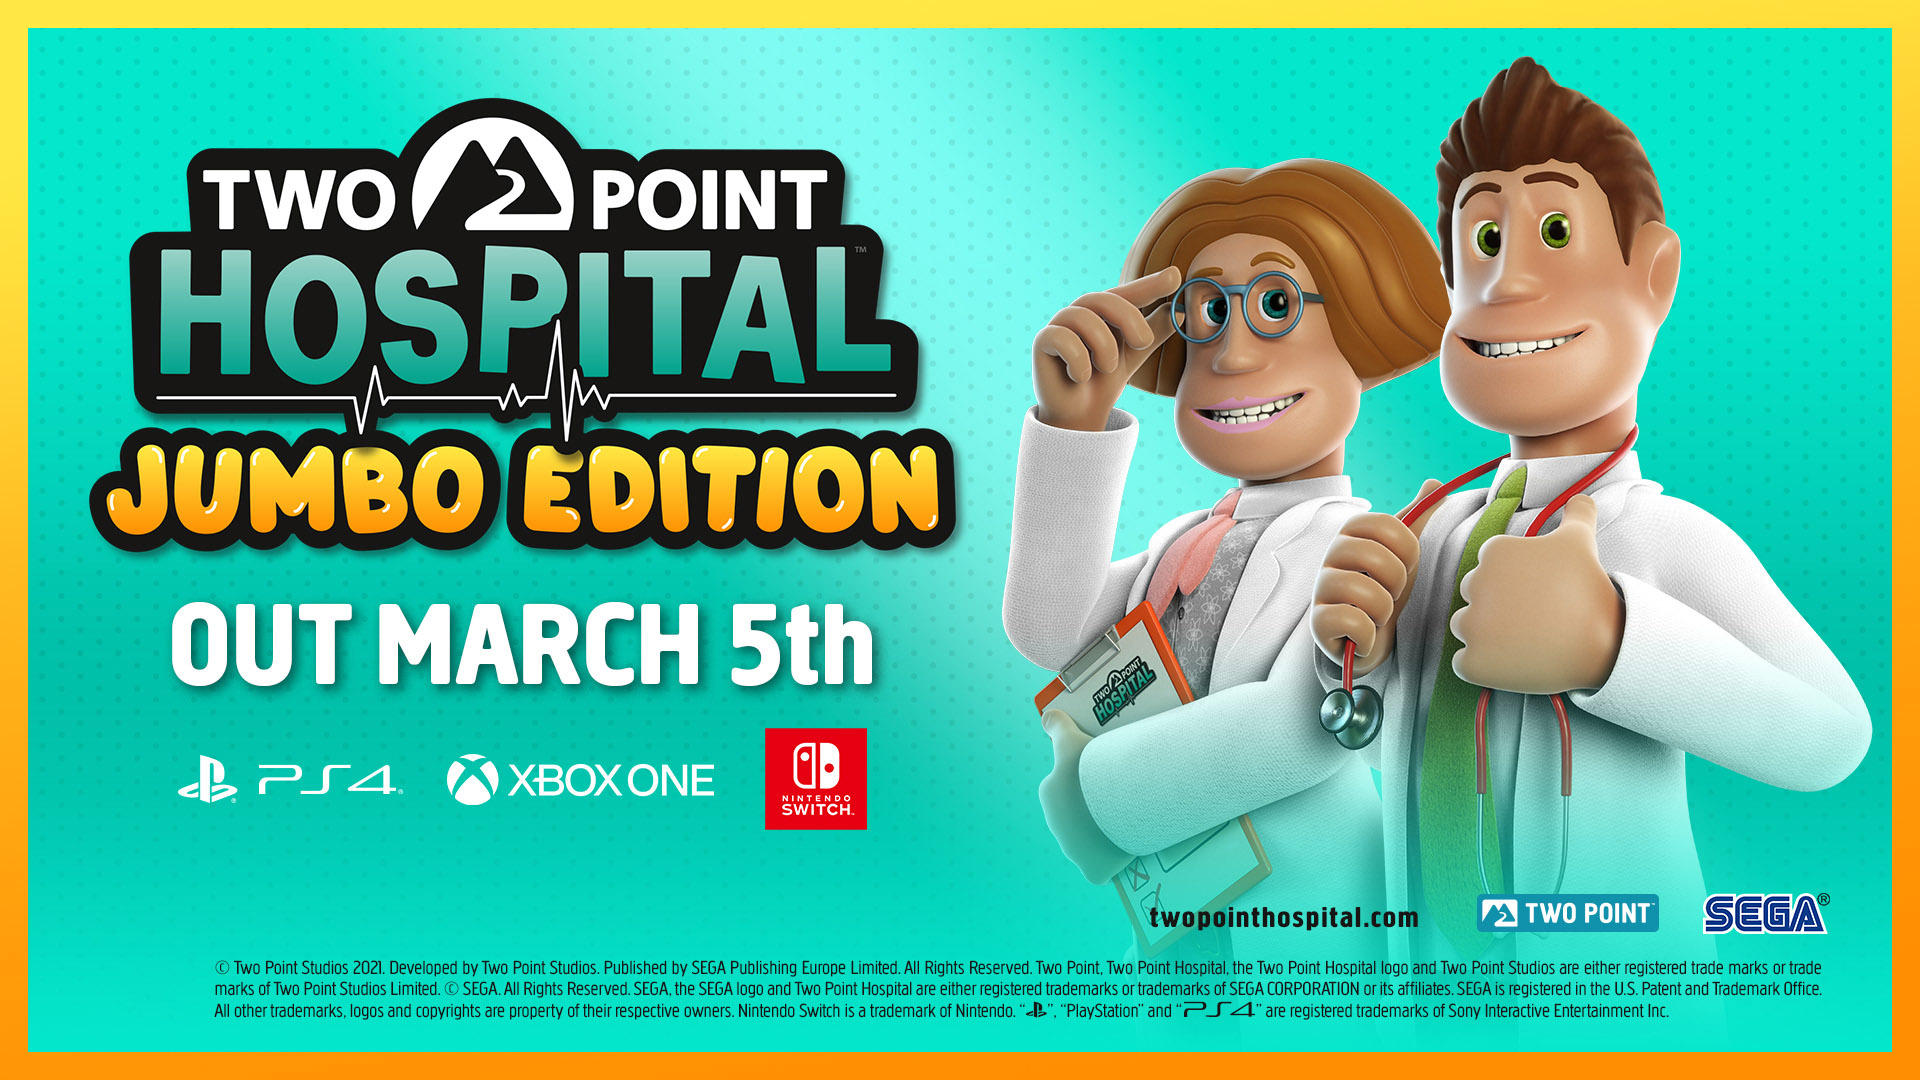 Two Point Hospital: JUMBO Edition coming to PS4, Xbox One, and Switch March 5 -